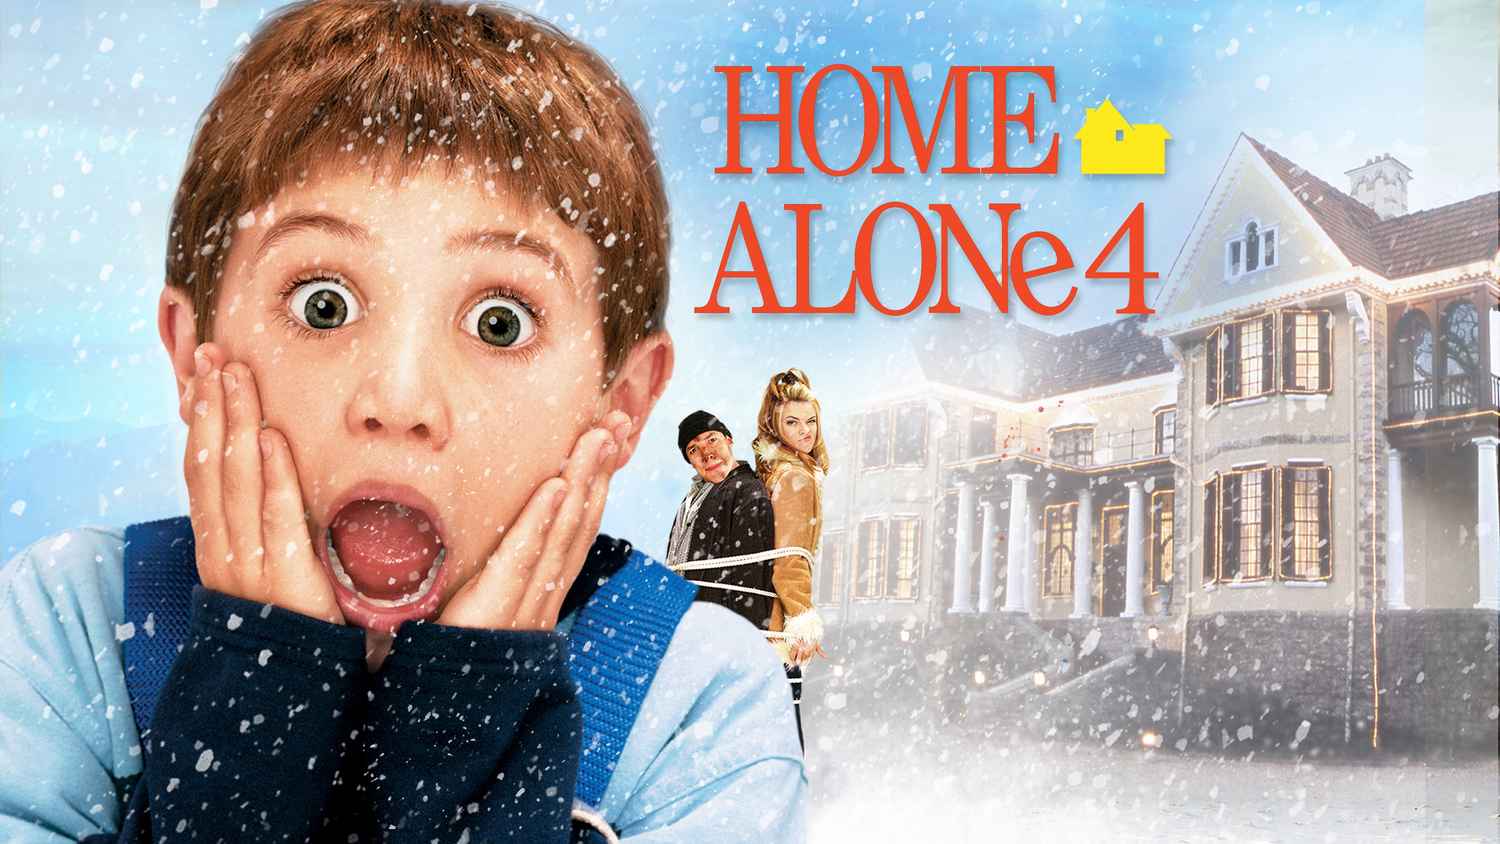 Watch Home Alone 4 Movie Online, Release Date, Trailer, Cast and Songs